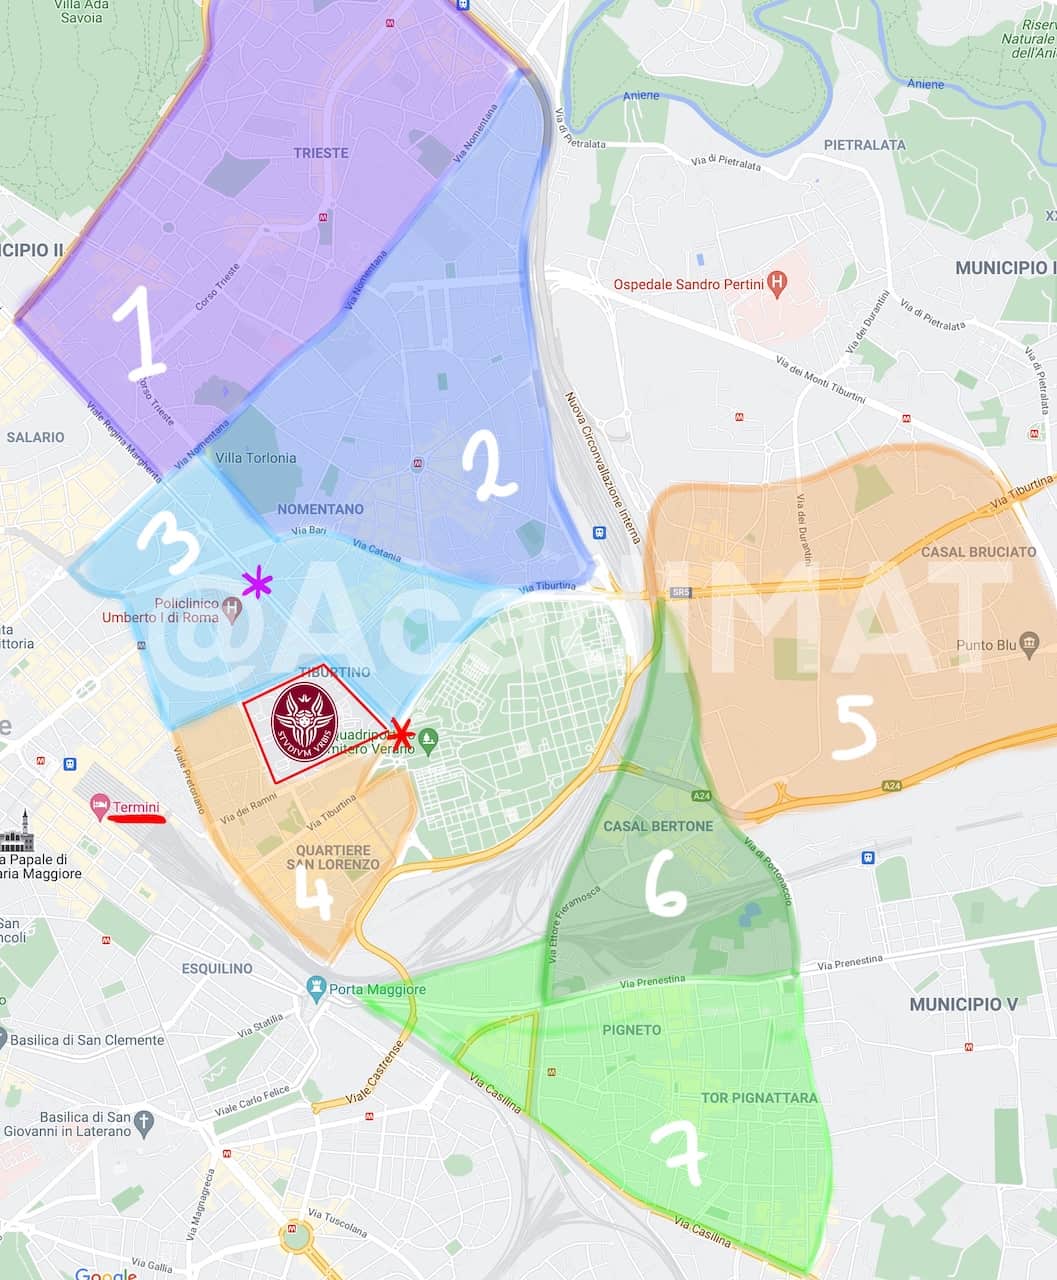 Colour coded map showing the different neighbourhoods next to La Sapienza university for popular choices for students